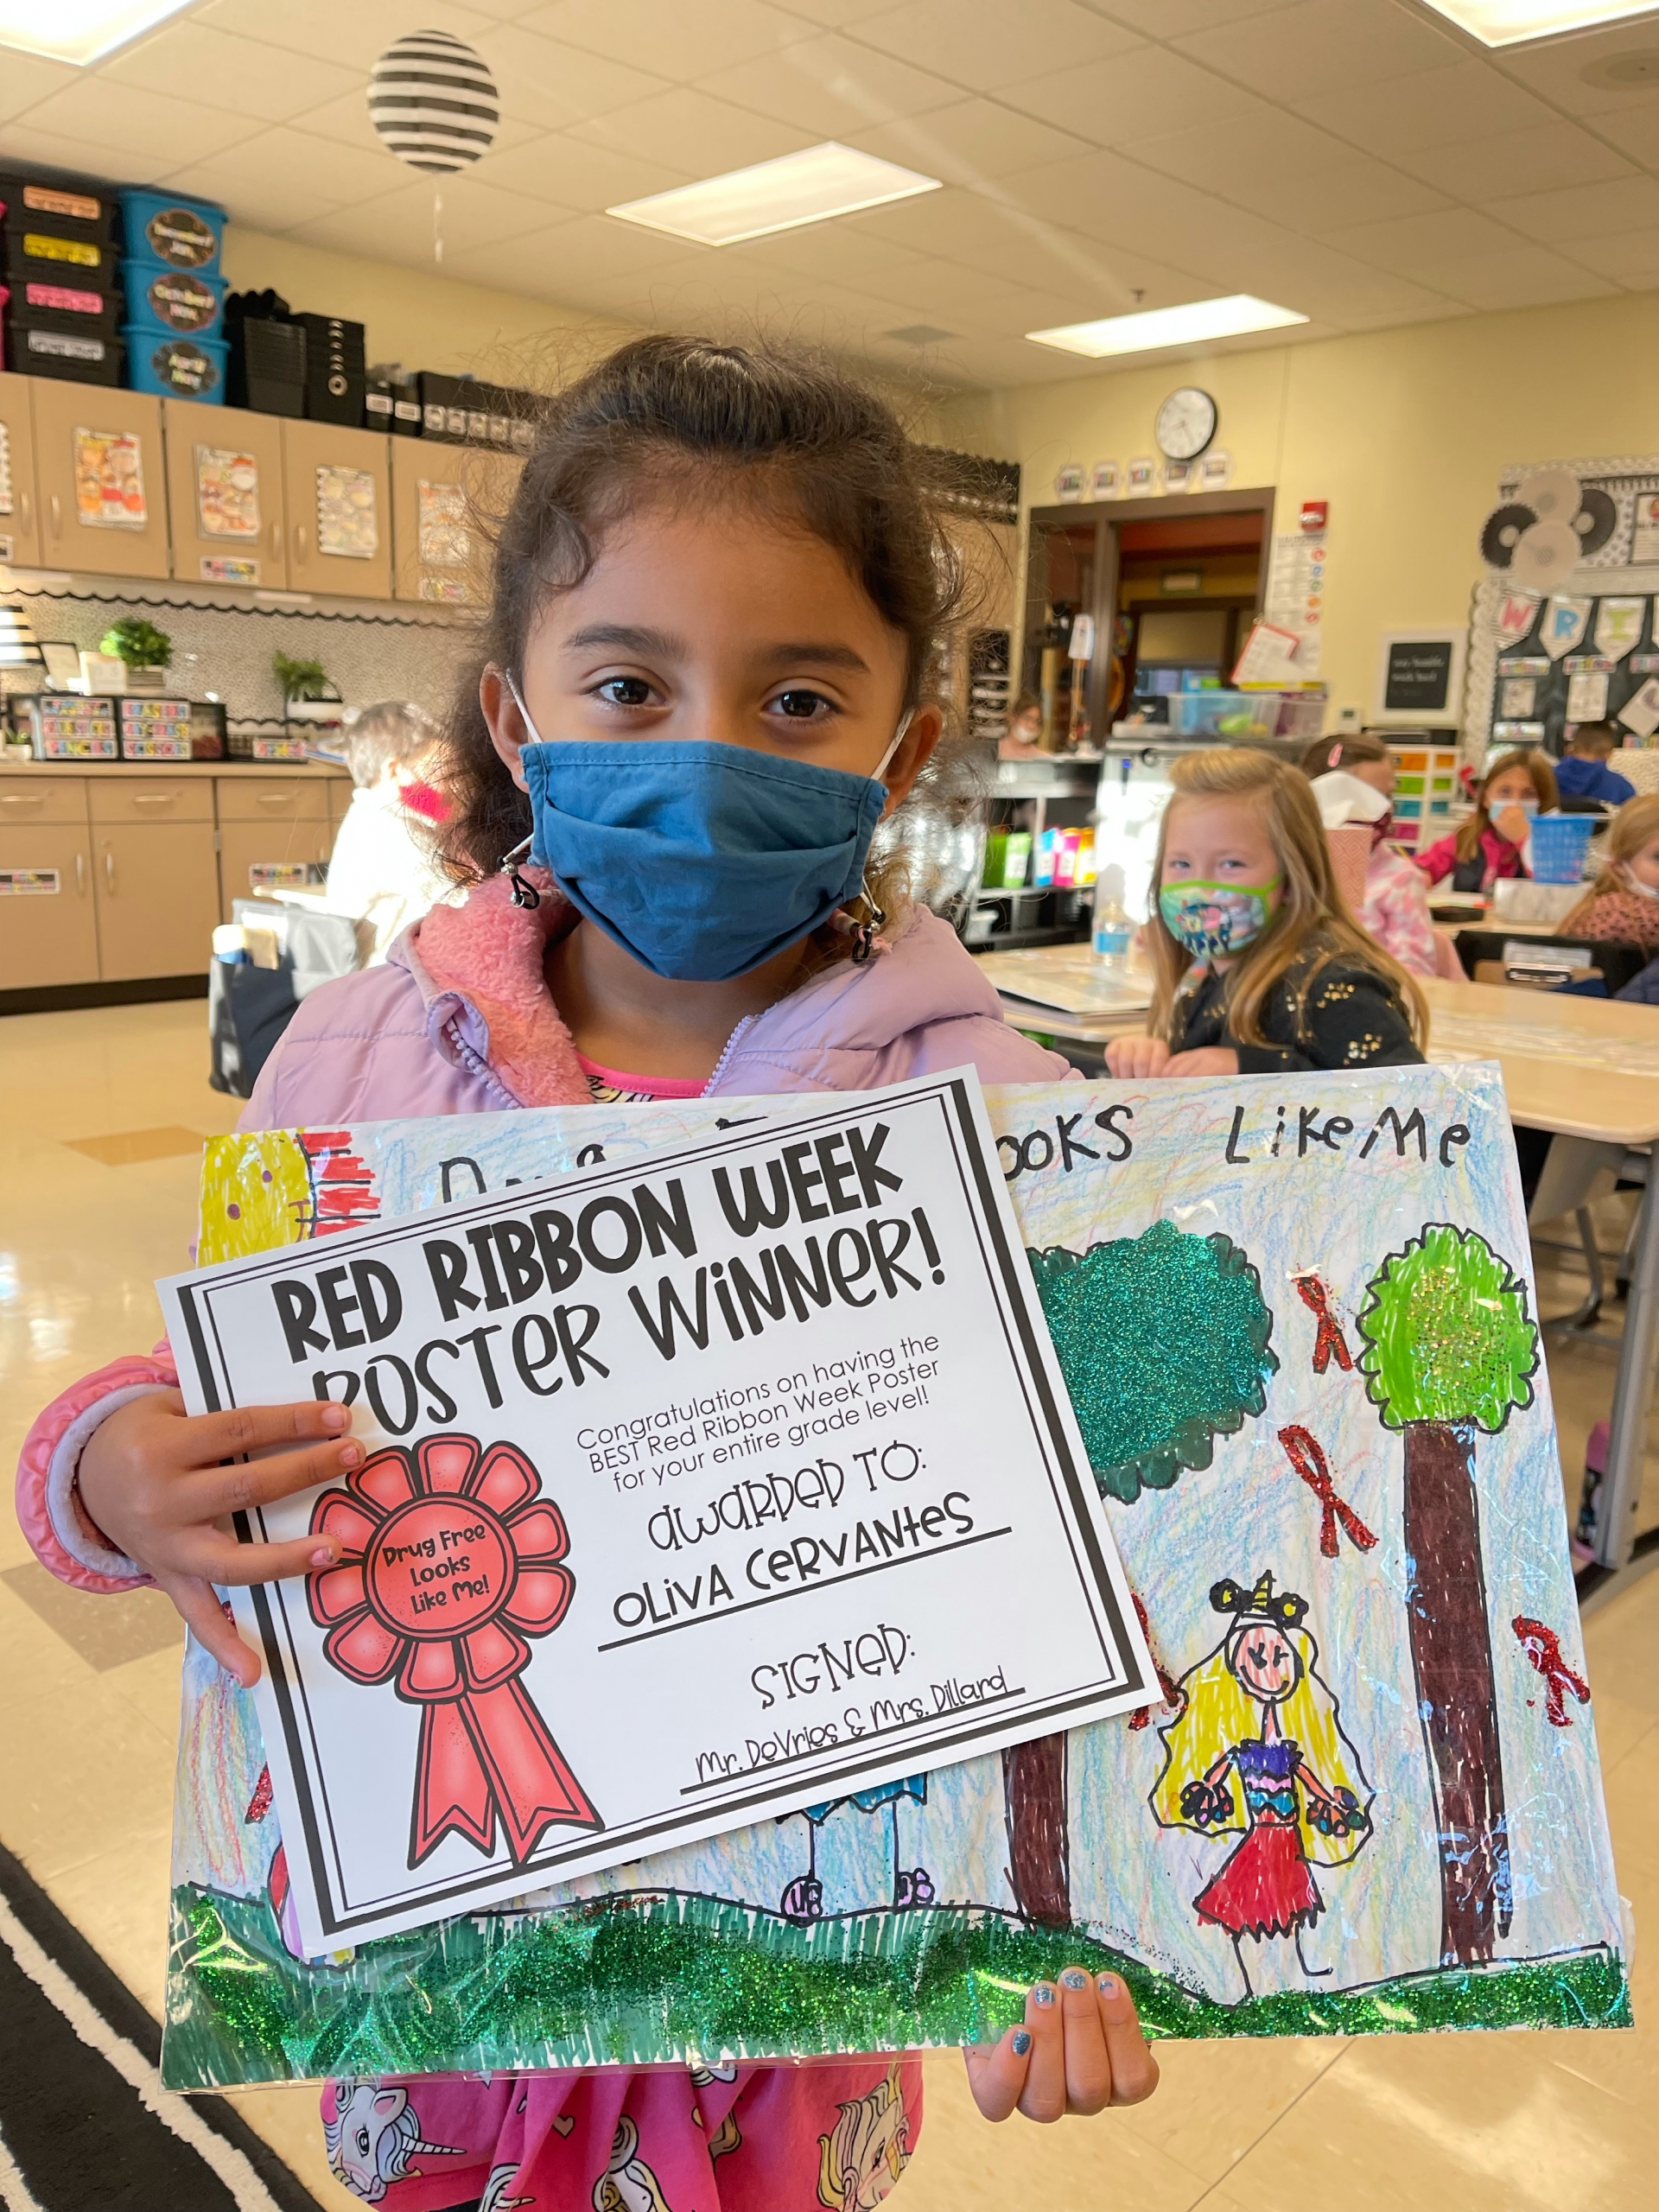 Congratulations to Protsman's Red Ribbon Poster contest winners!